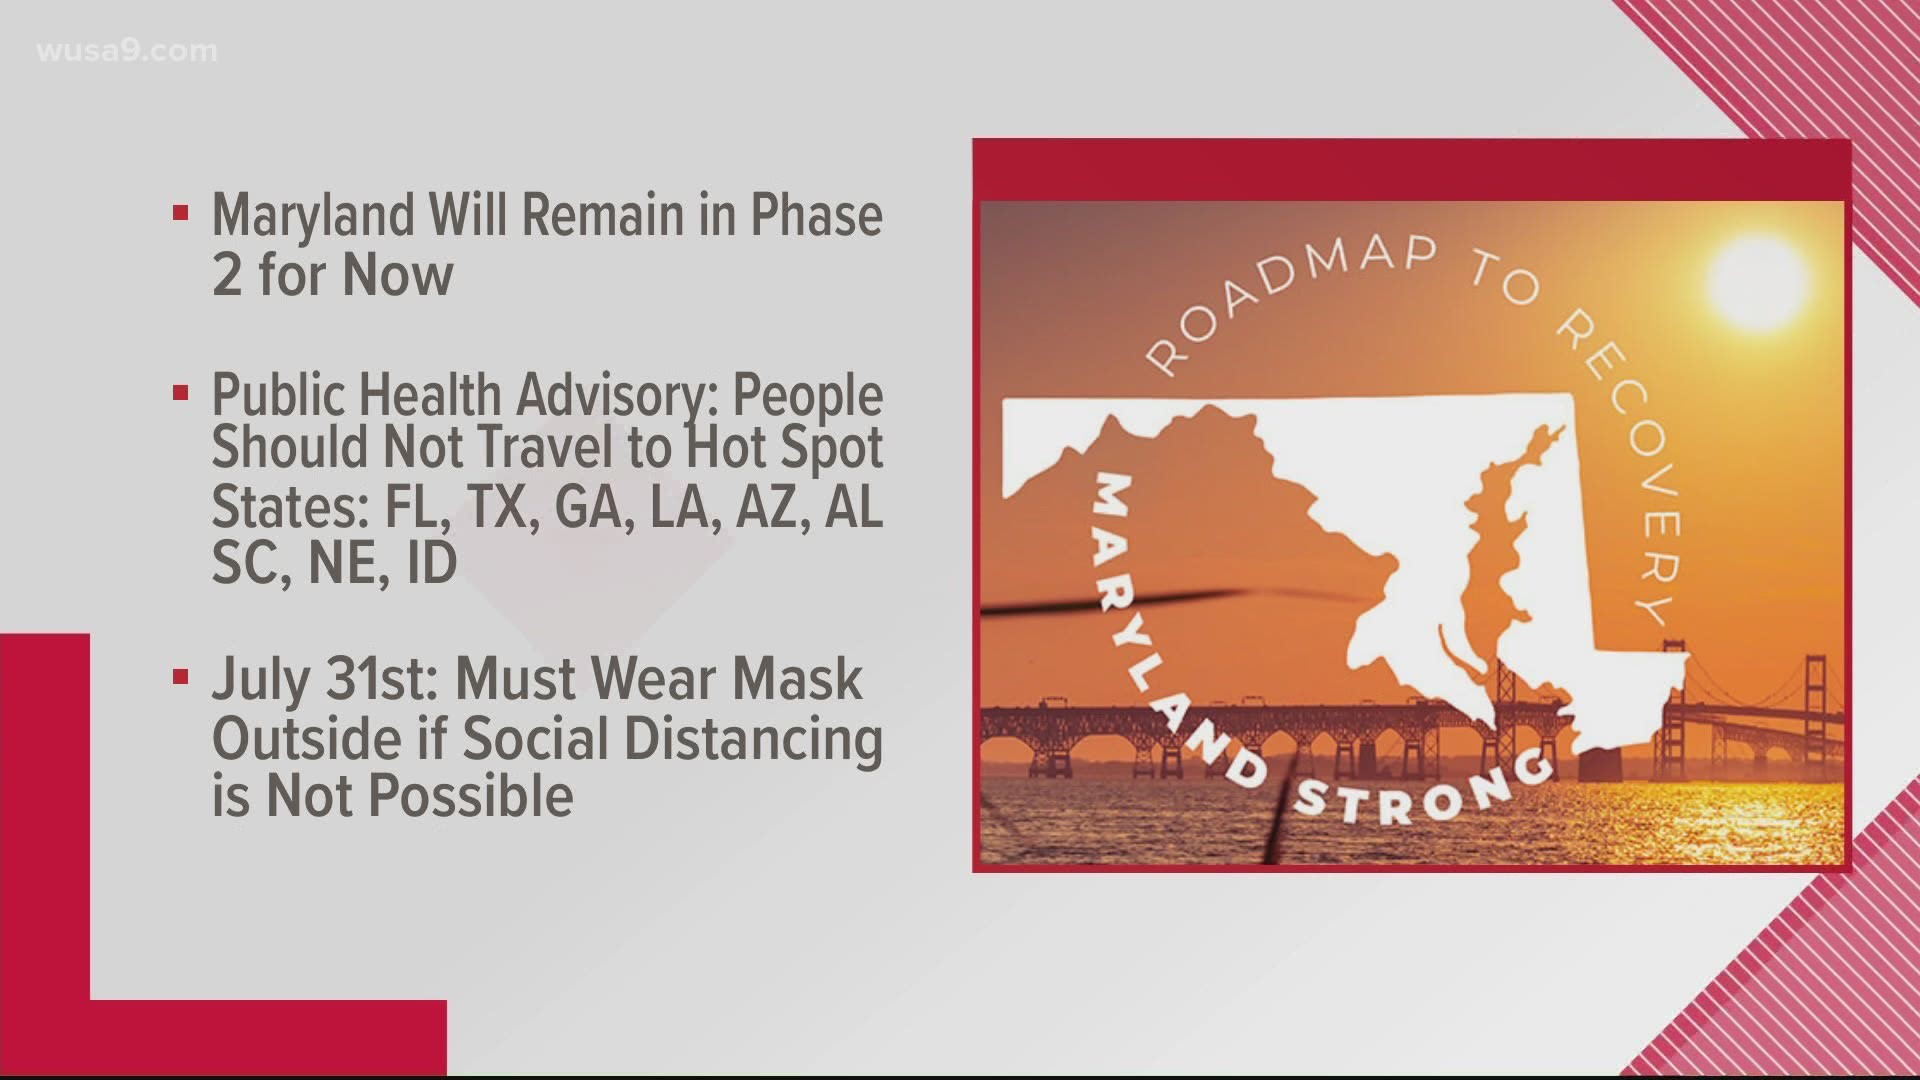 Masks required in public spaces, some outdoor areas in Maryland as hospitalizations increase.